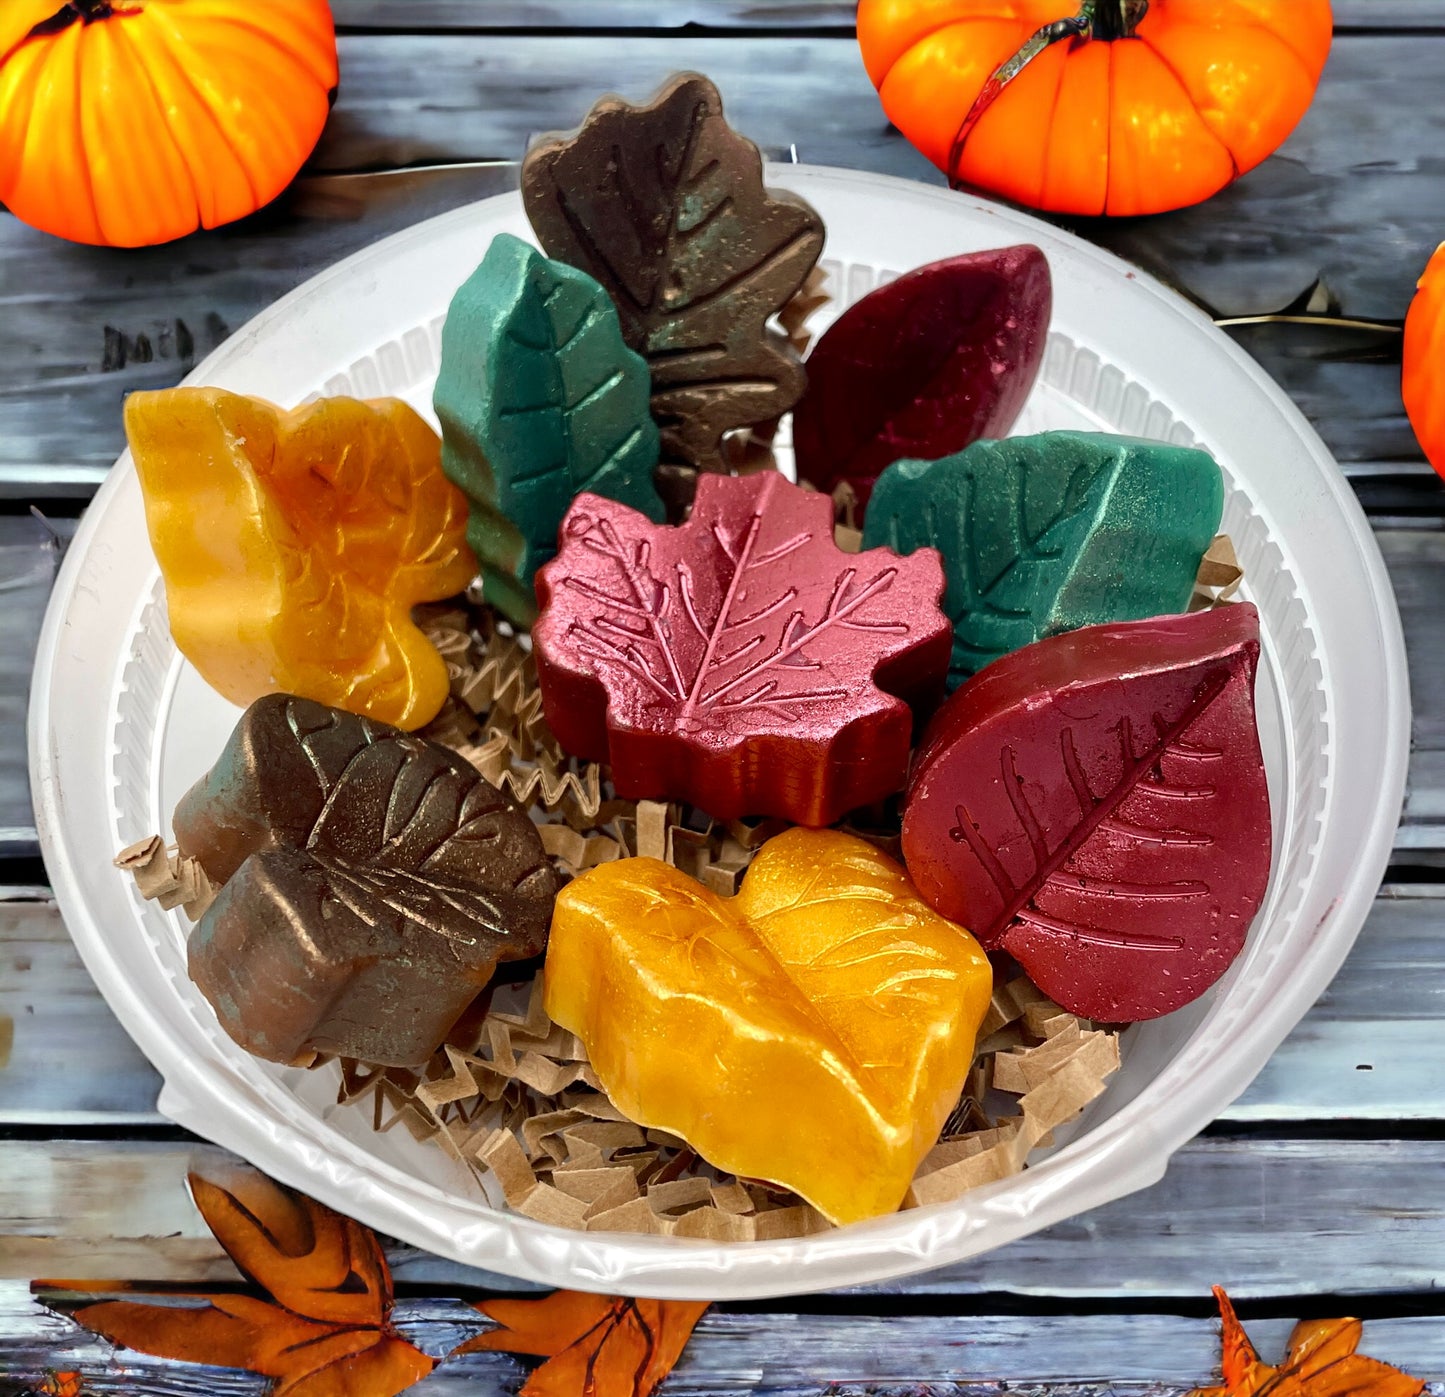 Leaves Wax Melts. 4 Scent Variety Pack. 3 Oz. Soy Wax Melts/Leaf Shaped/Strongly Scented Wax Melts/Wax Tarts for Wax Warmers/Fall Wax Melts